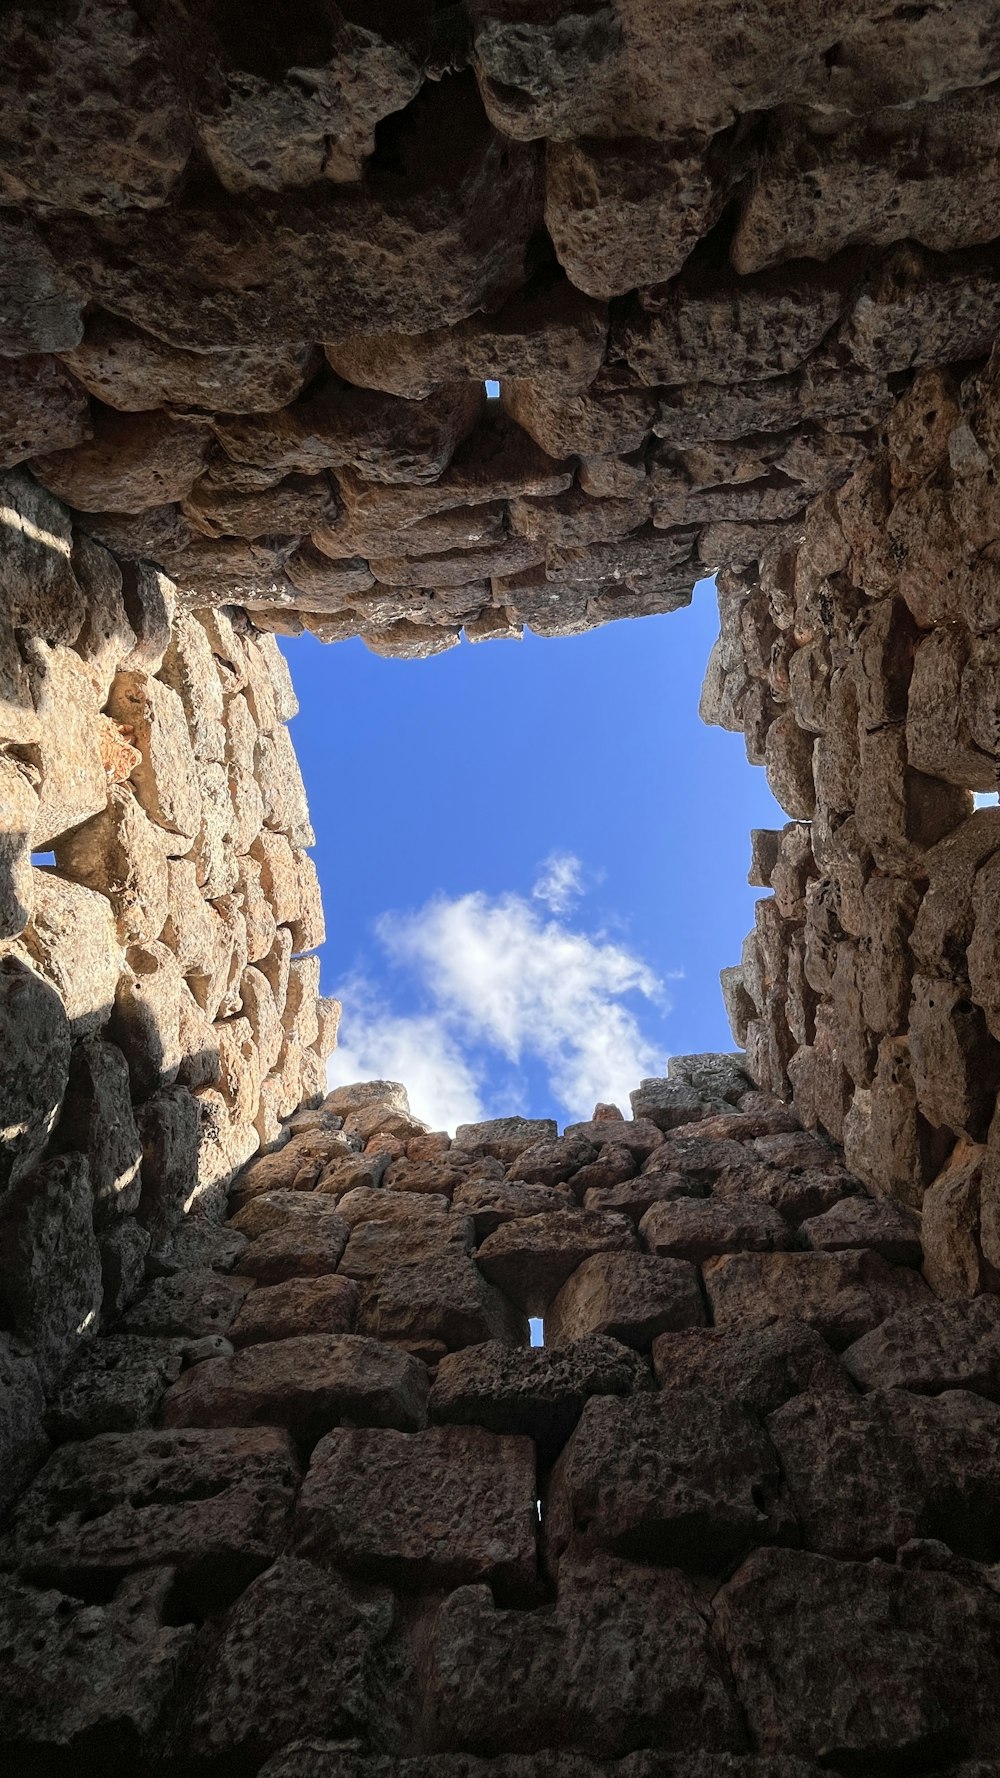 a view of the sky through a window in a stone structure